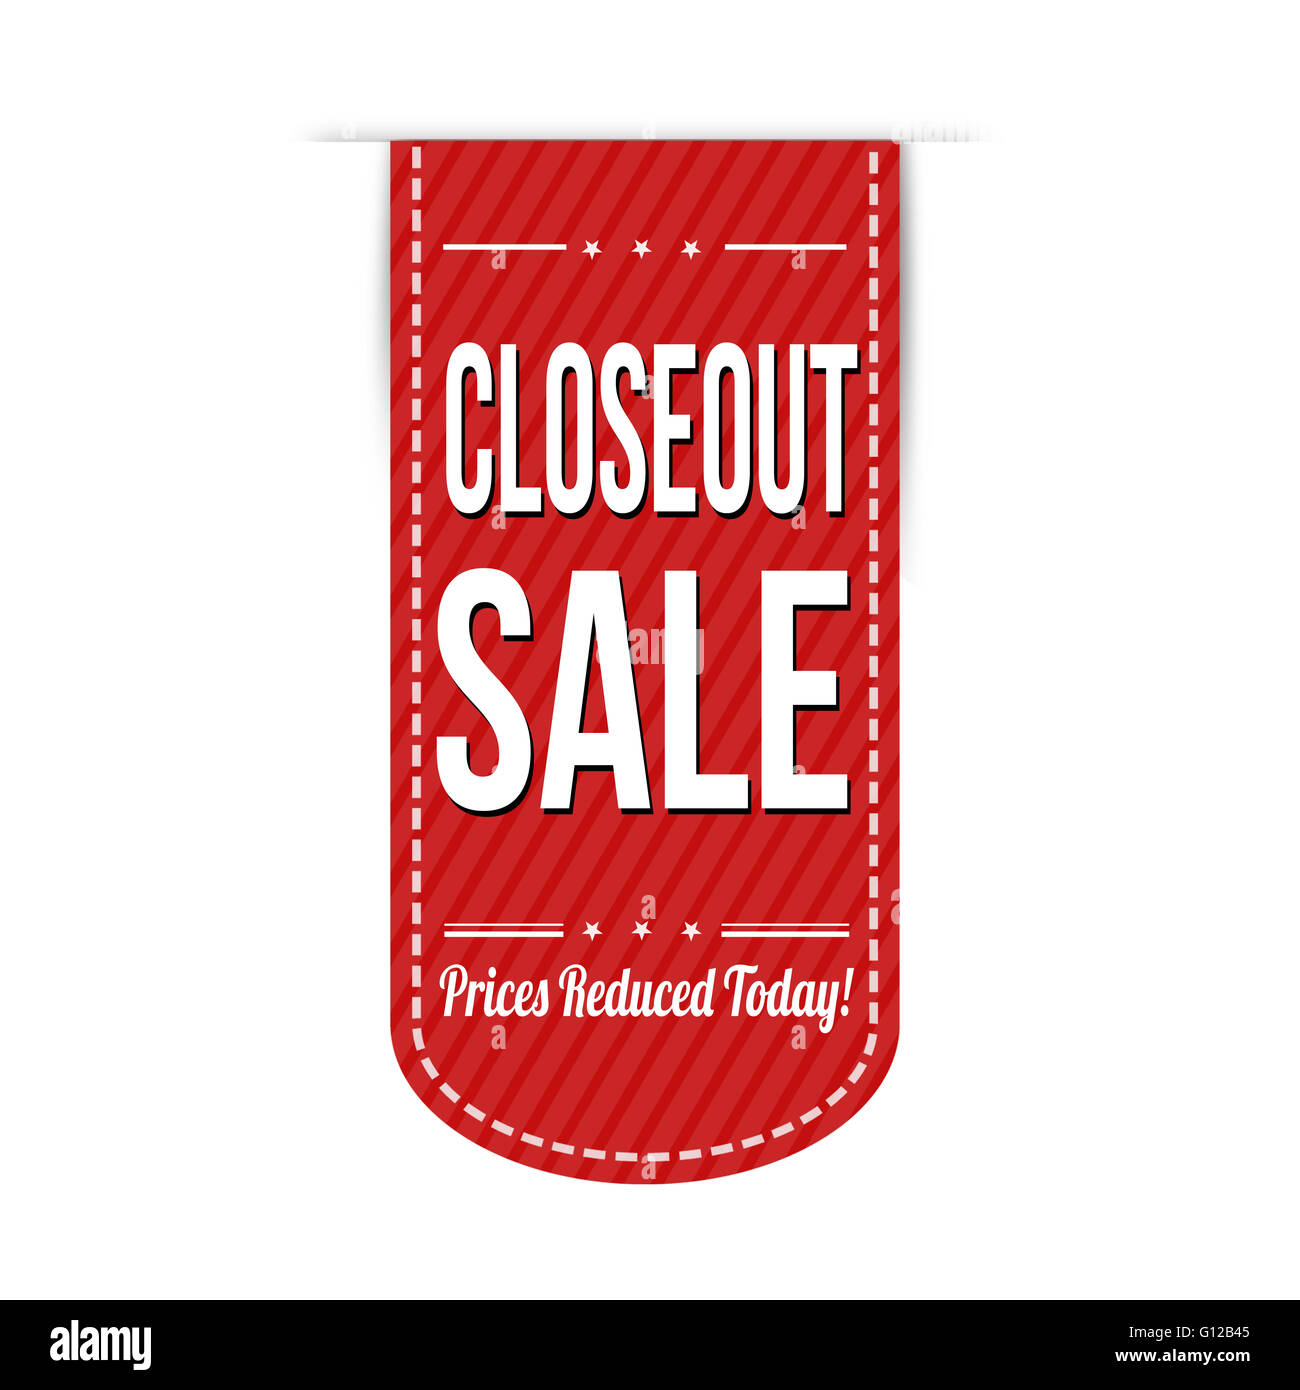 Closeout sale banner design over a white background, vector illustration Stock Photo